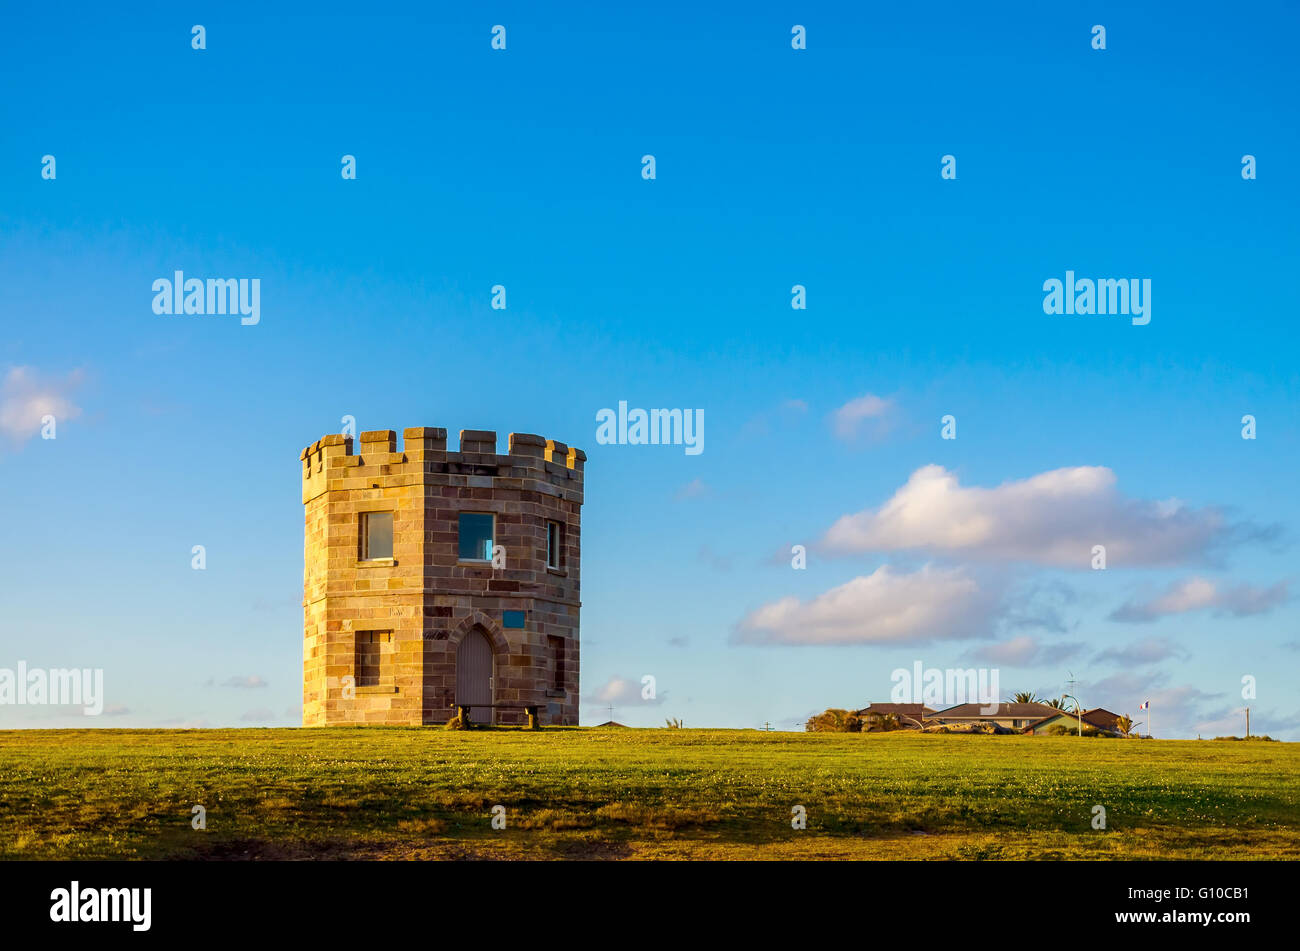 Sydney, Australia - September 15, 2012: 19th century Customs Tower, also known as Macquarie Watchtower at La Perouse, Botany Bay Stock Photo